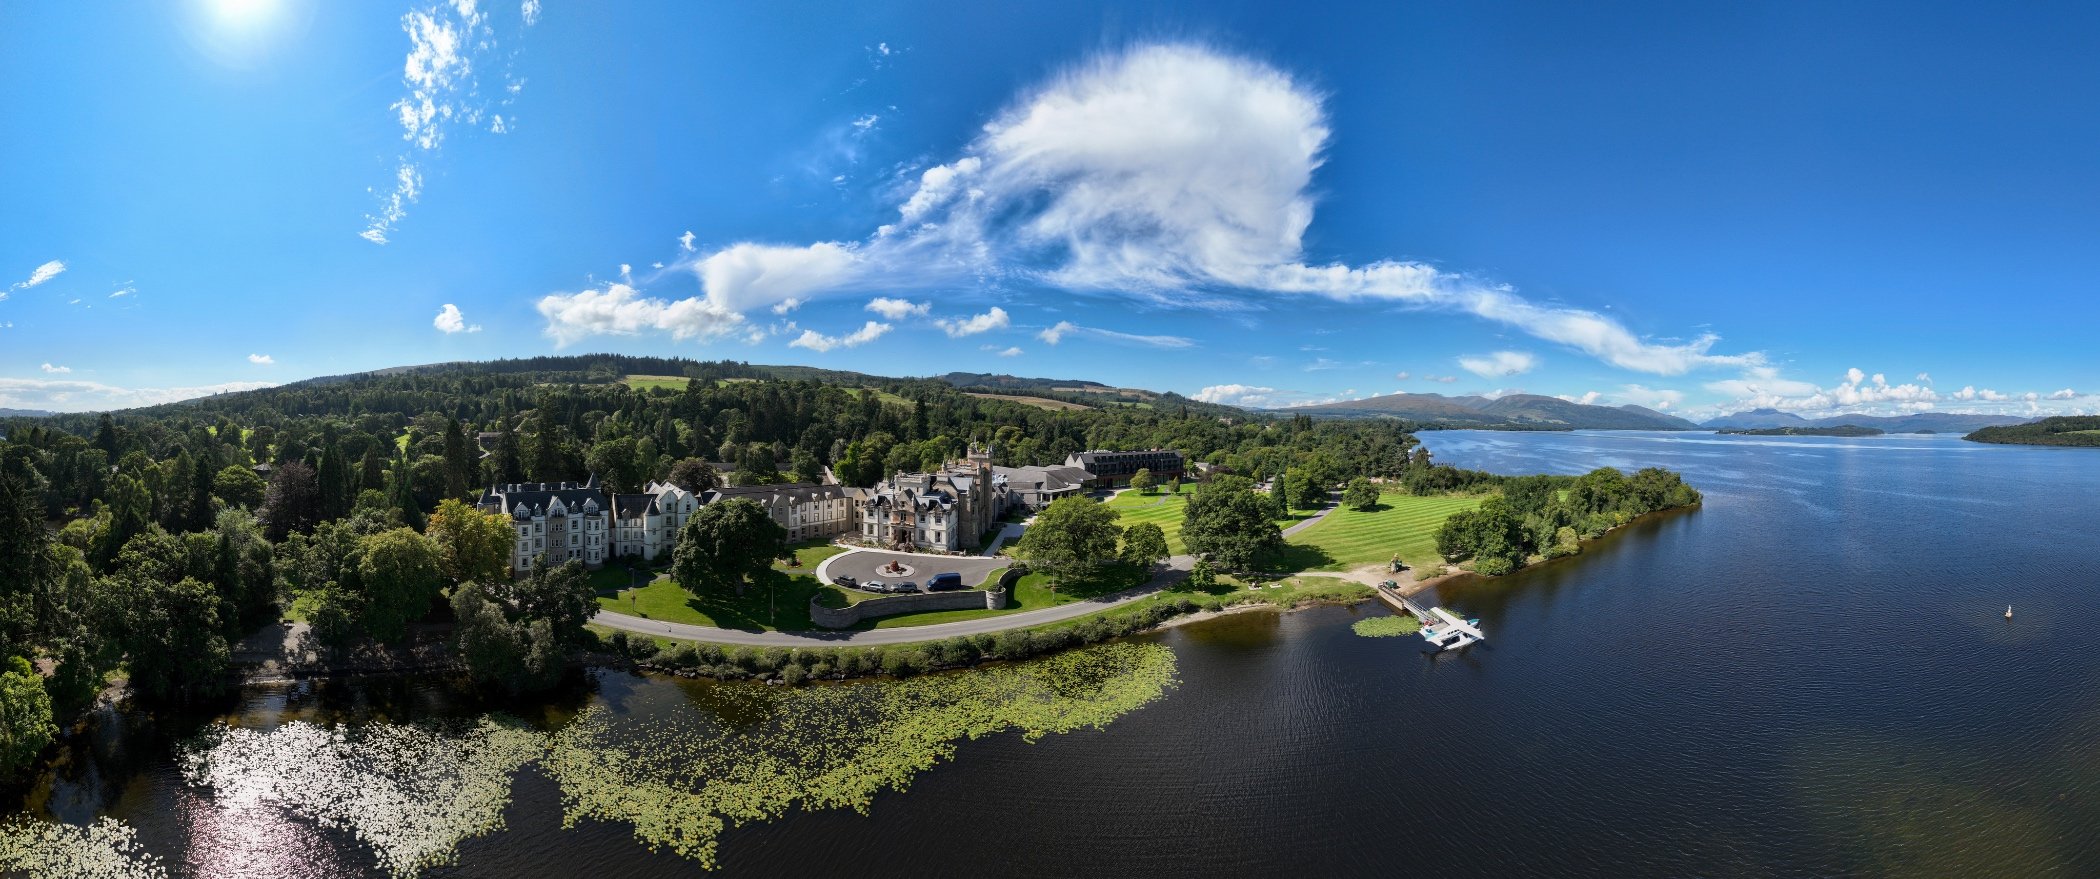 Aerial view of cameron house showing the beautiful green hotel grounds and the blue waters of Loch Lomond